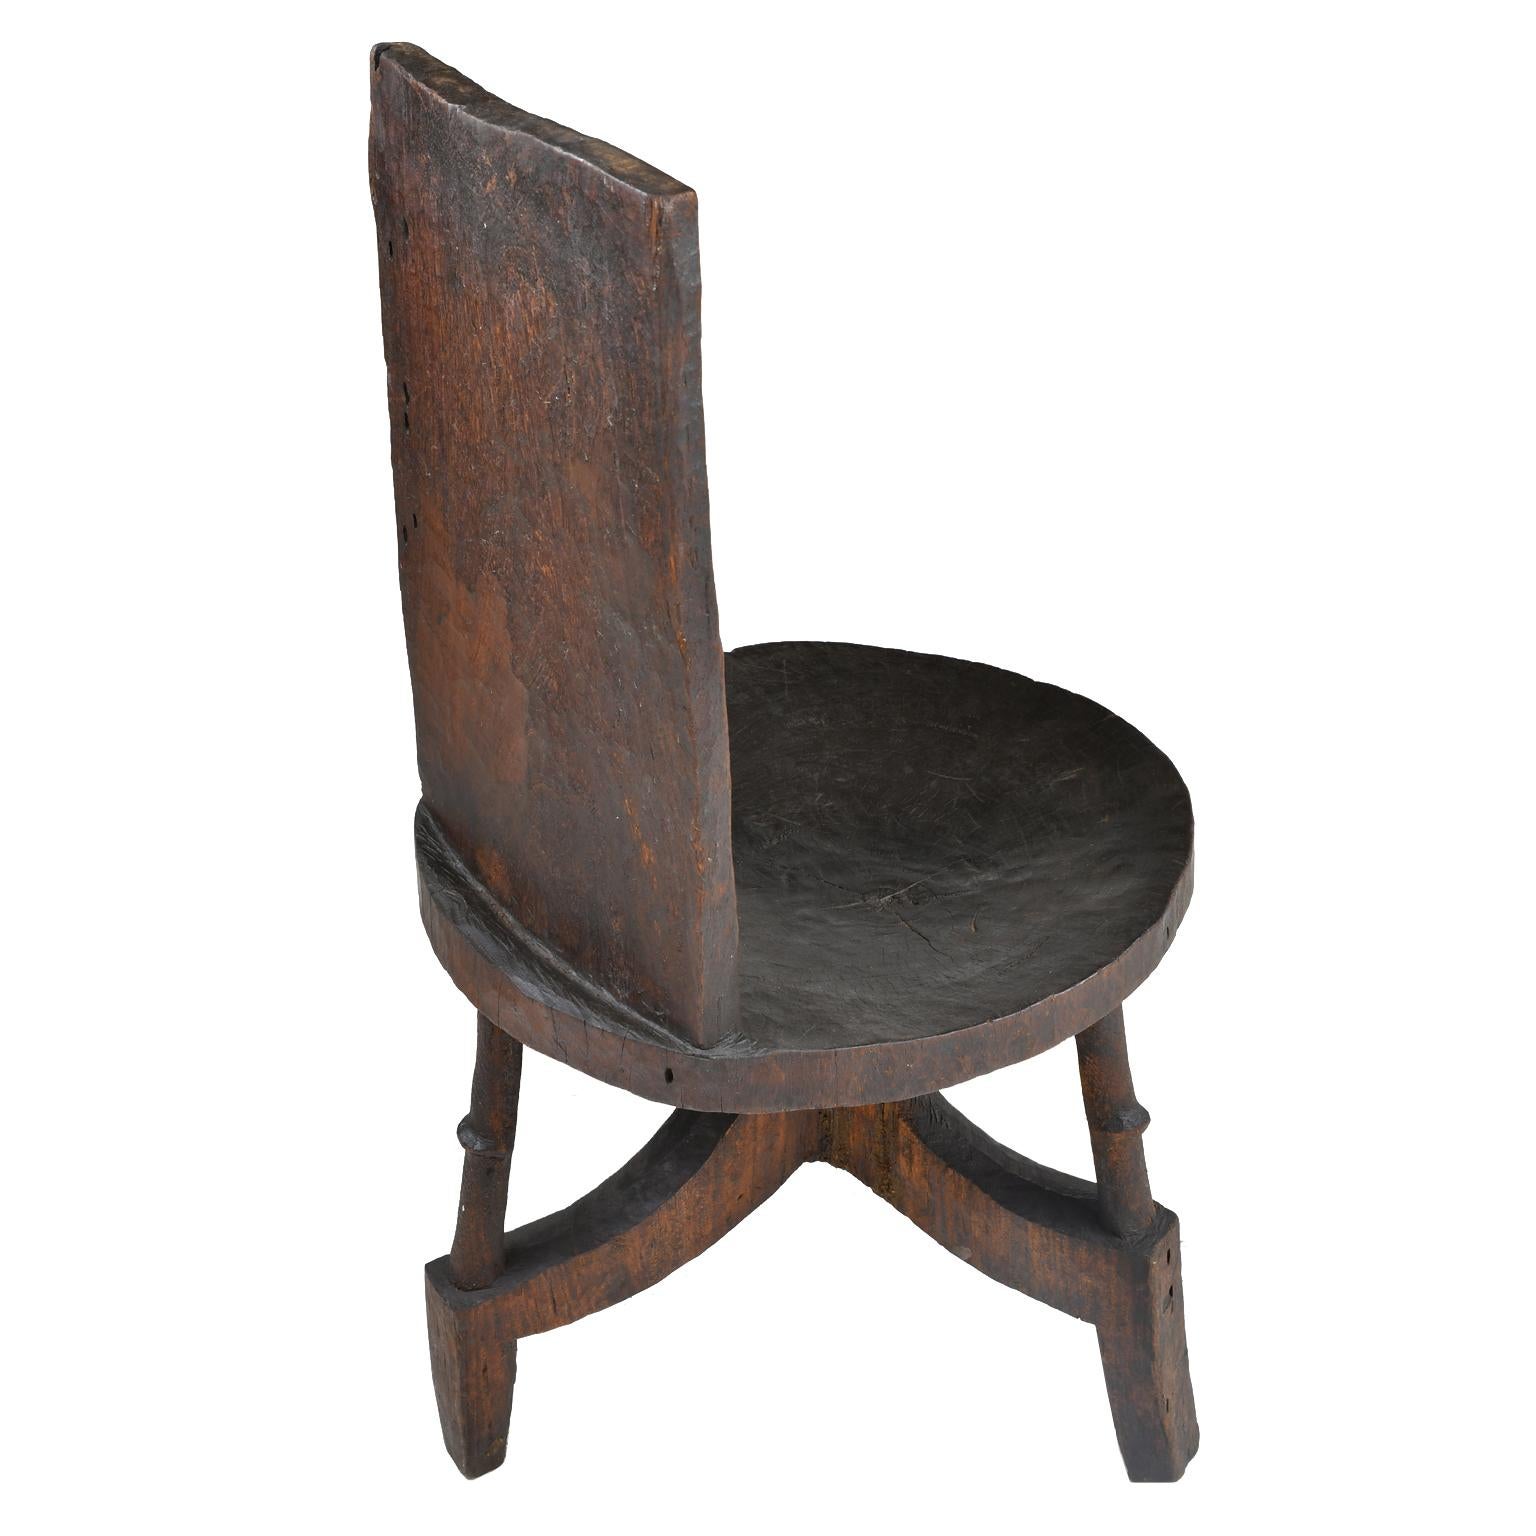 20th Century African Chieftain Chair from Oromo People in Ethiopia, circa Early 1900s For Sale